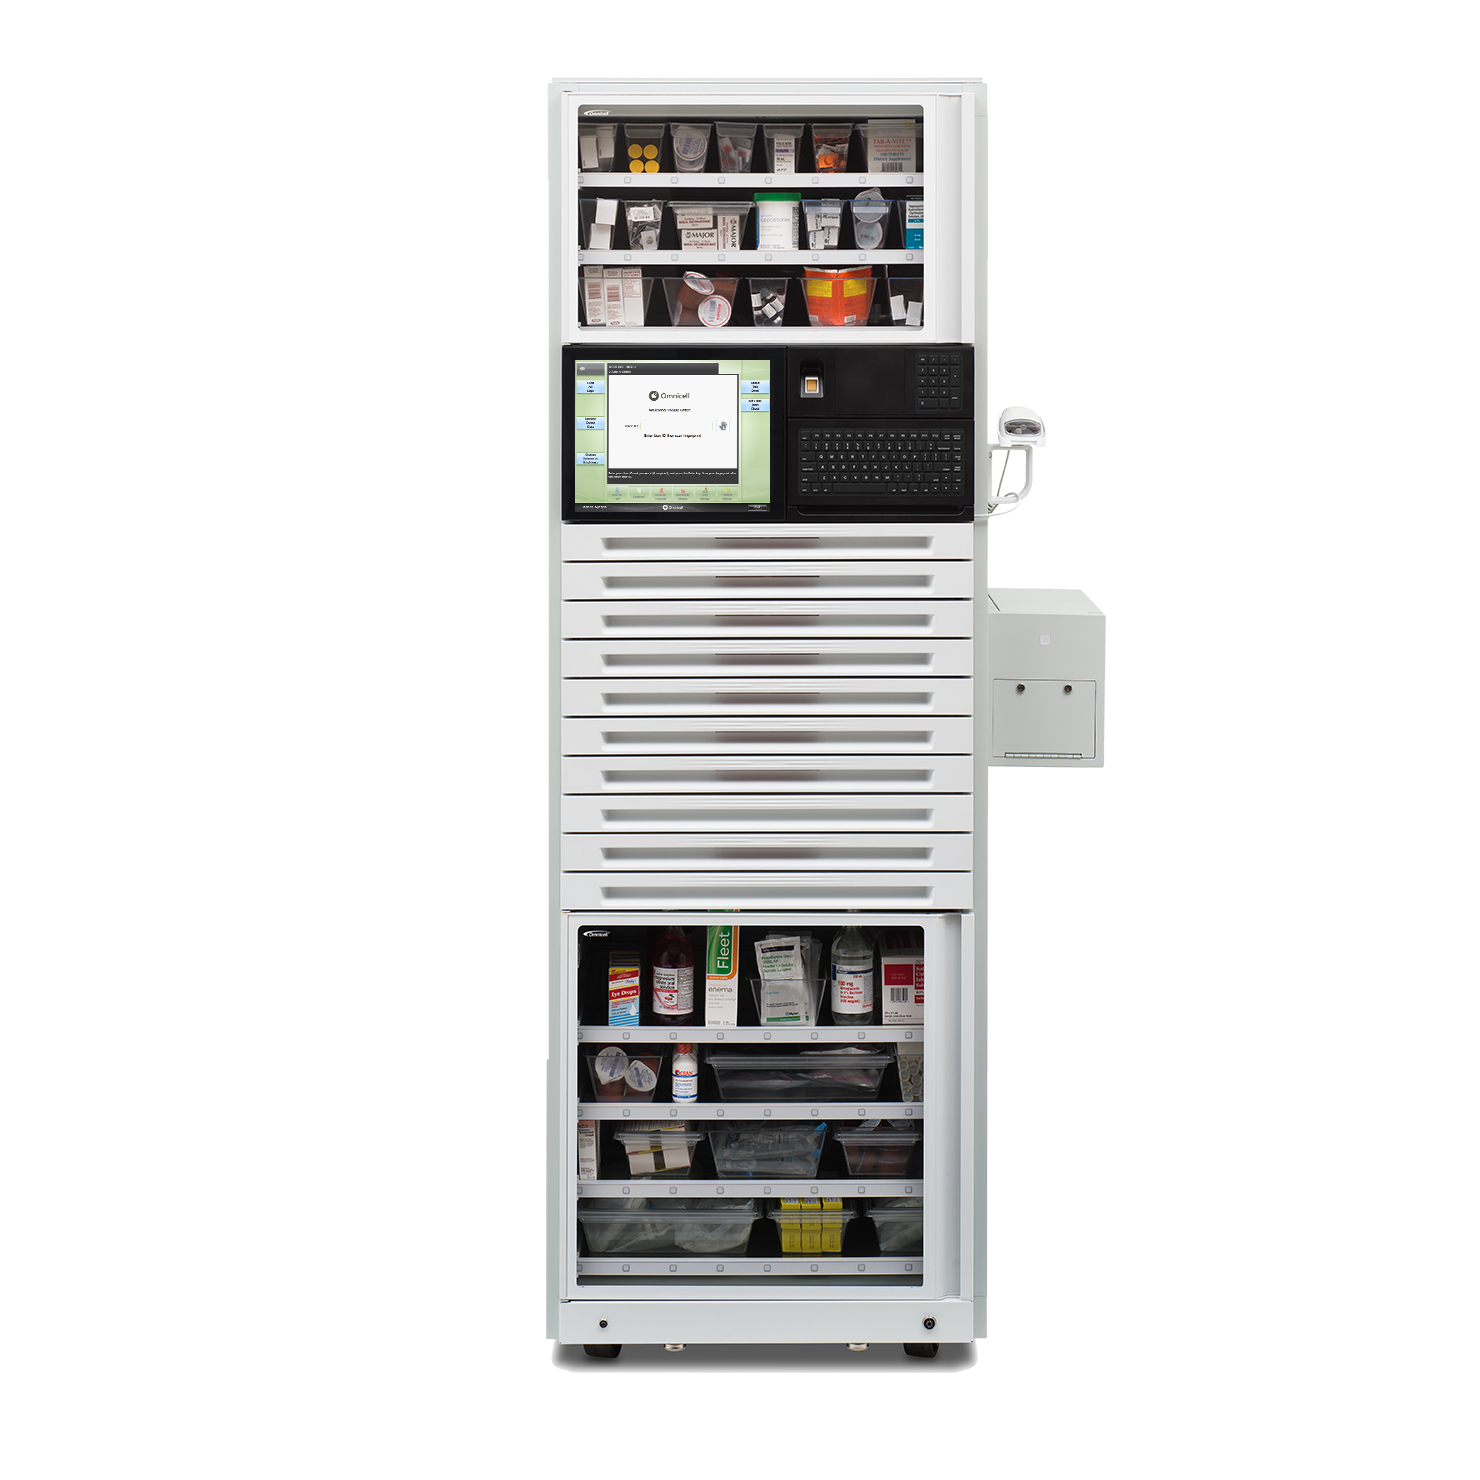 PoC002 XT Automated Dispensing Cabinet